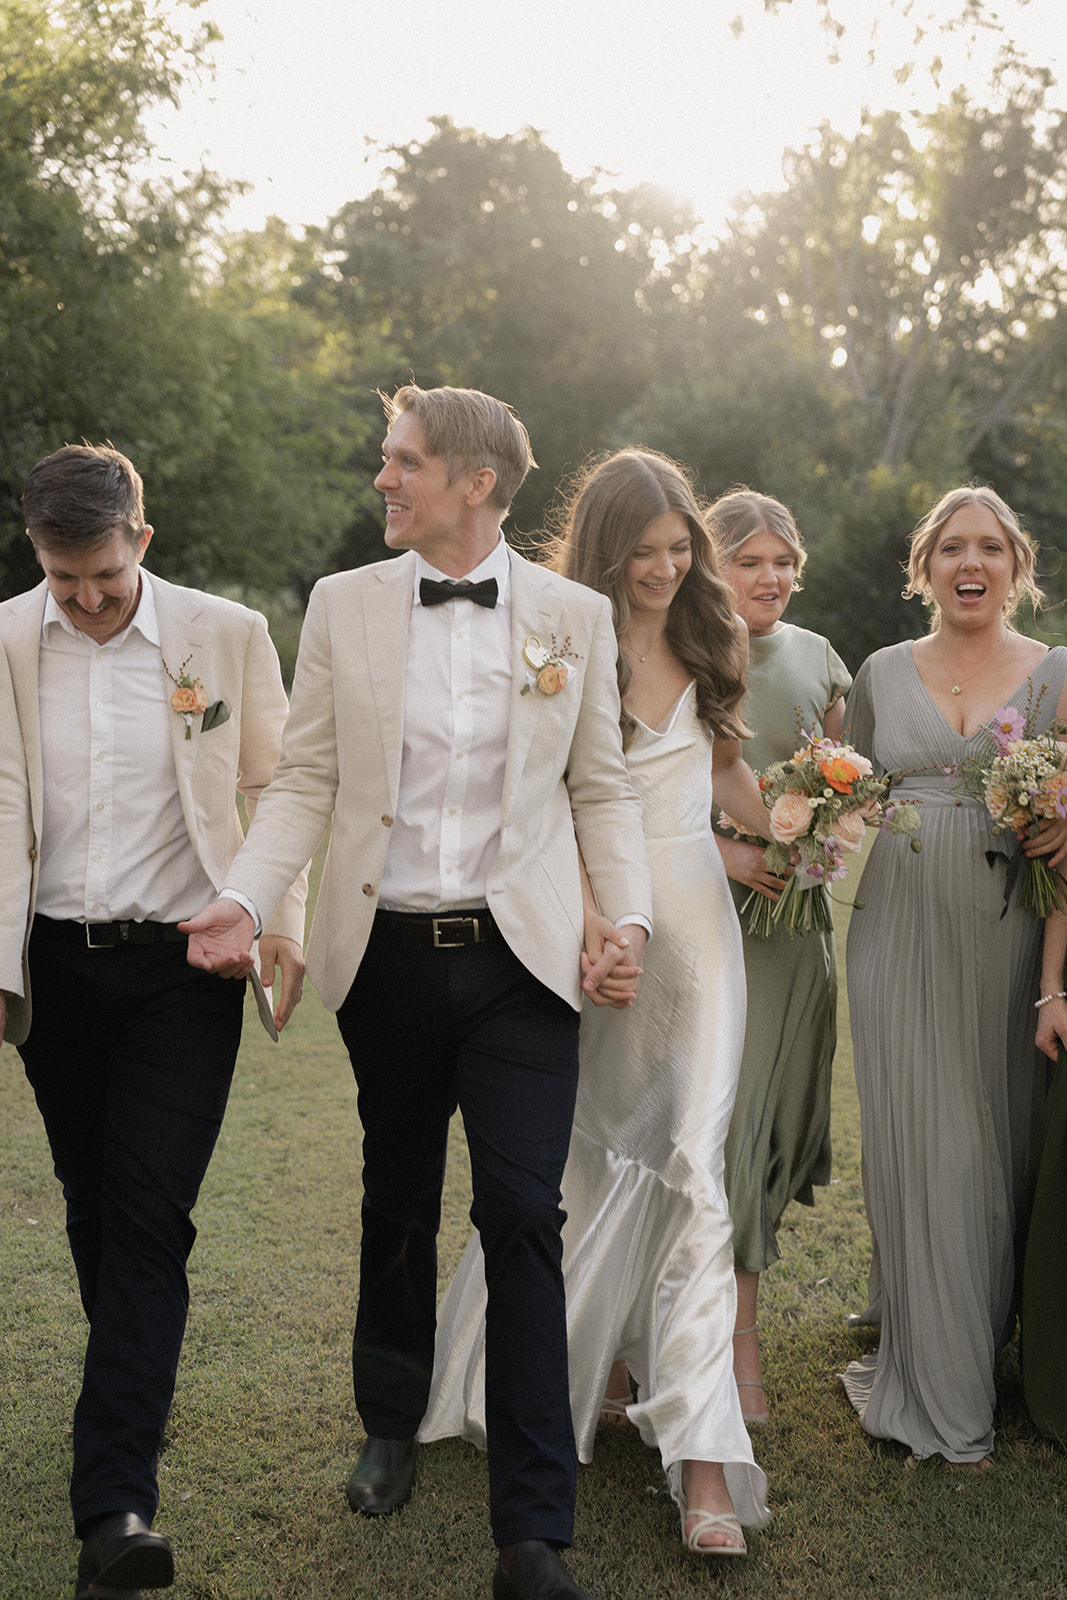 Brisbane editorial backyard wedding photography, candids of Bridal party in mixed green